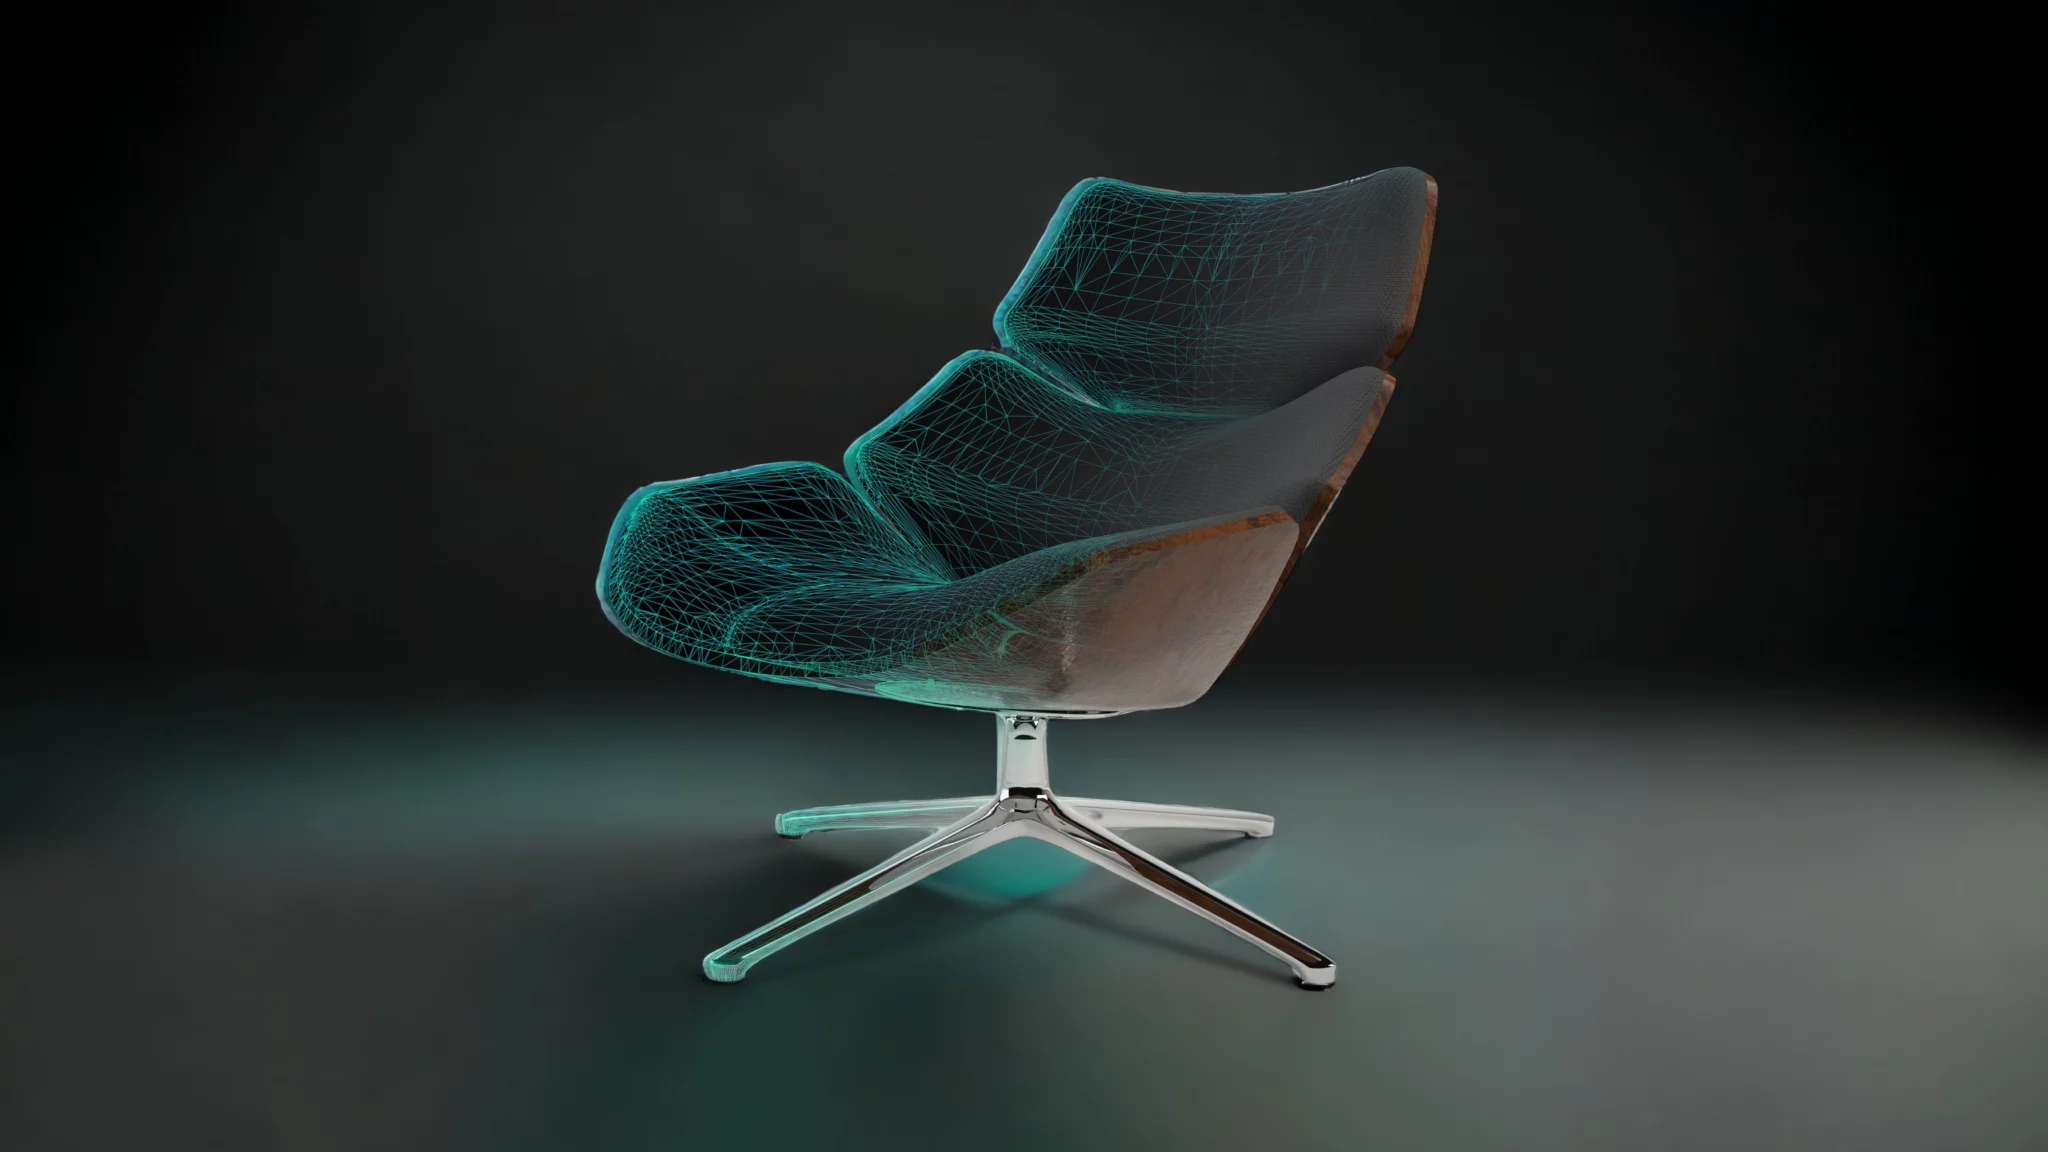 wireframe 3d model of a chair